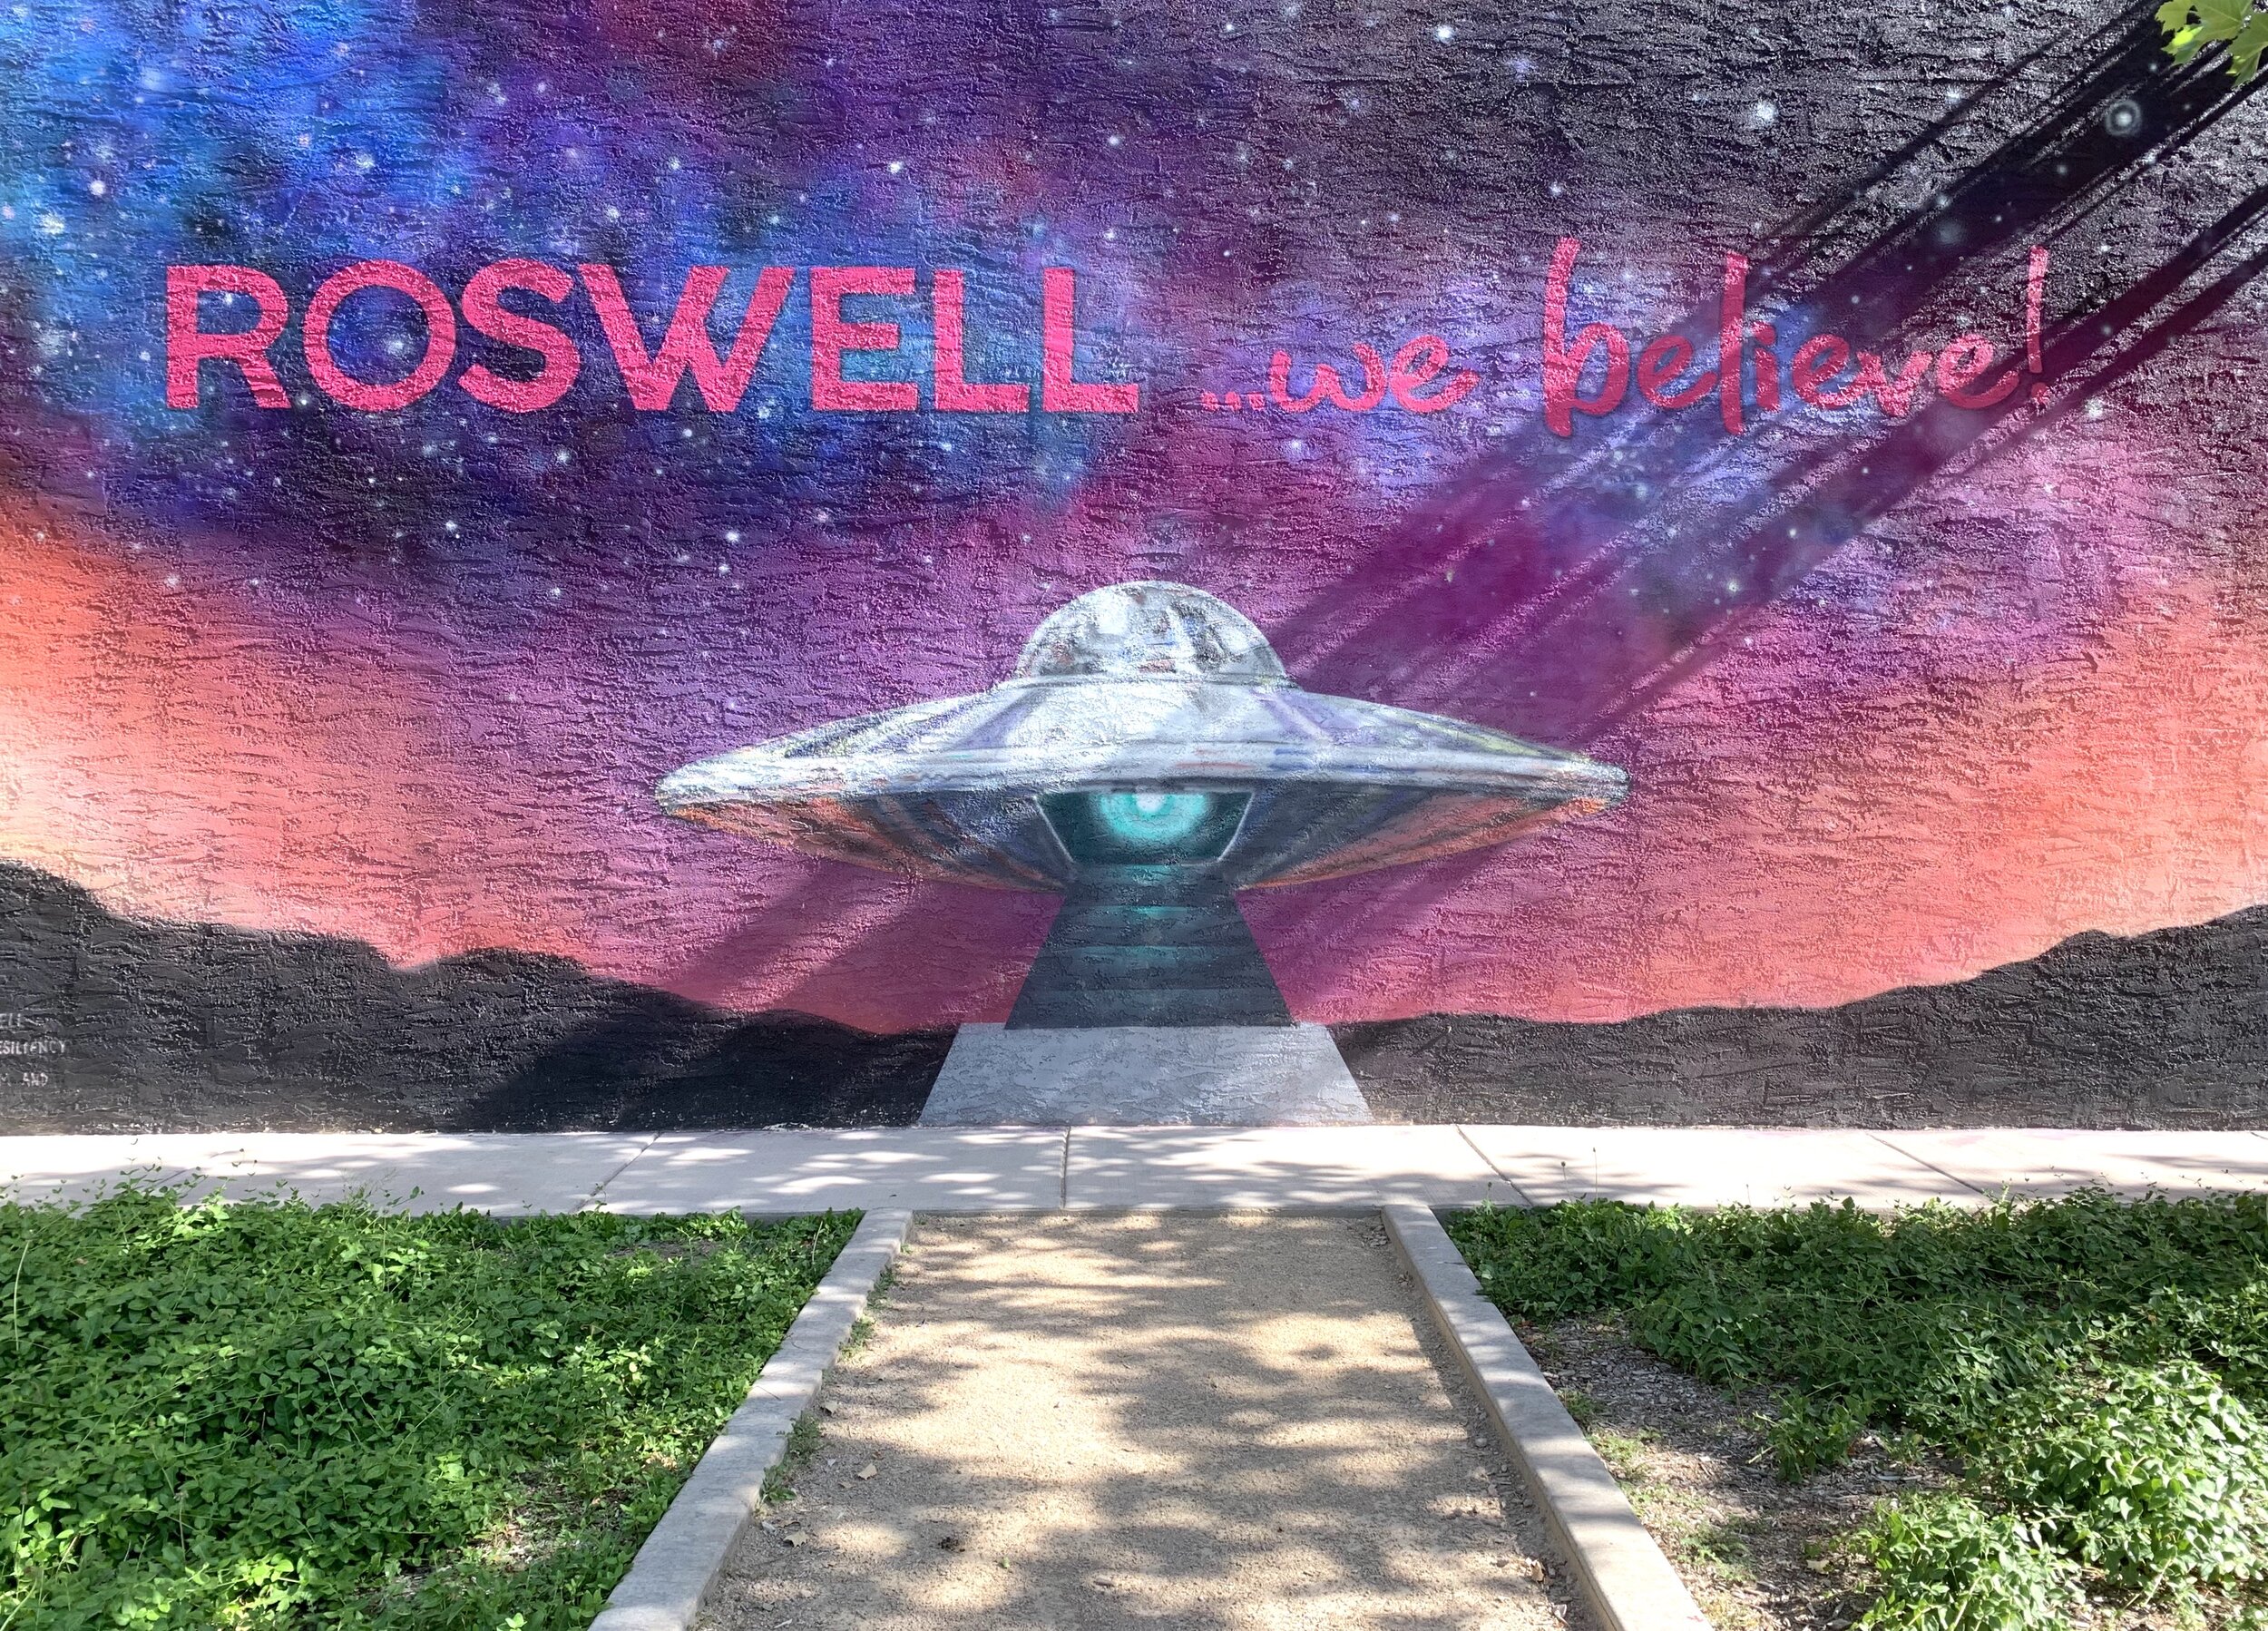  A current contest in Roswell challenges all to take their best selfie with this mural, painted on the side of a building in town, to win a prize. 